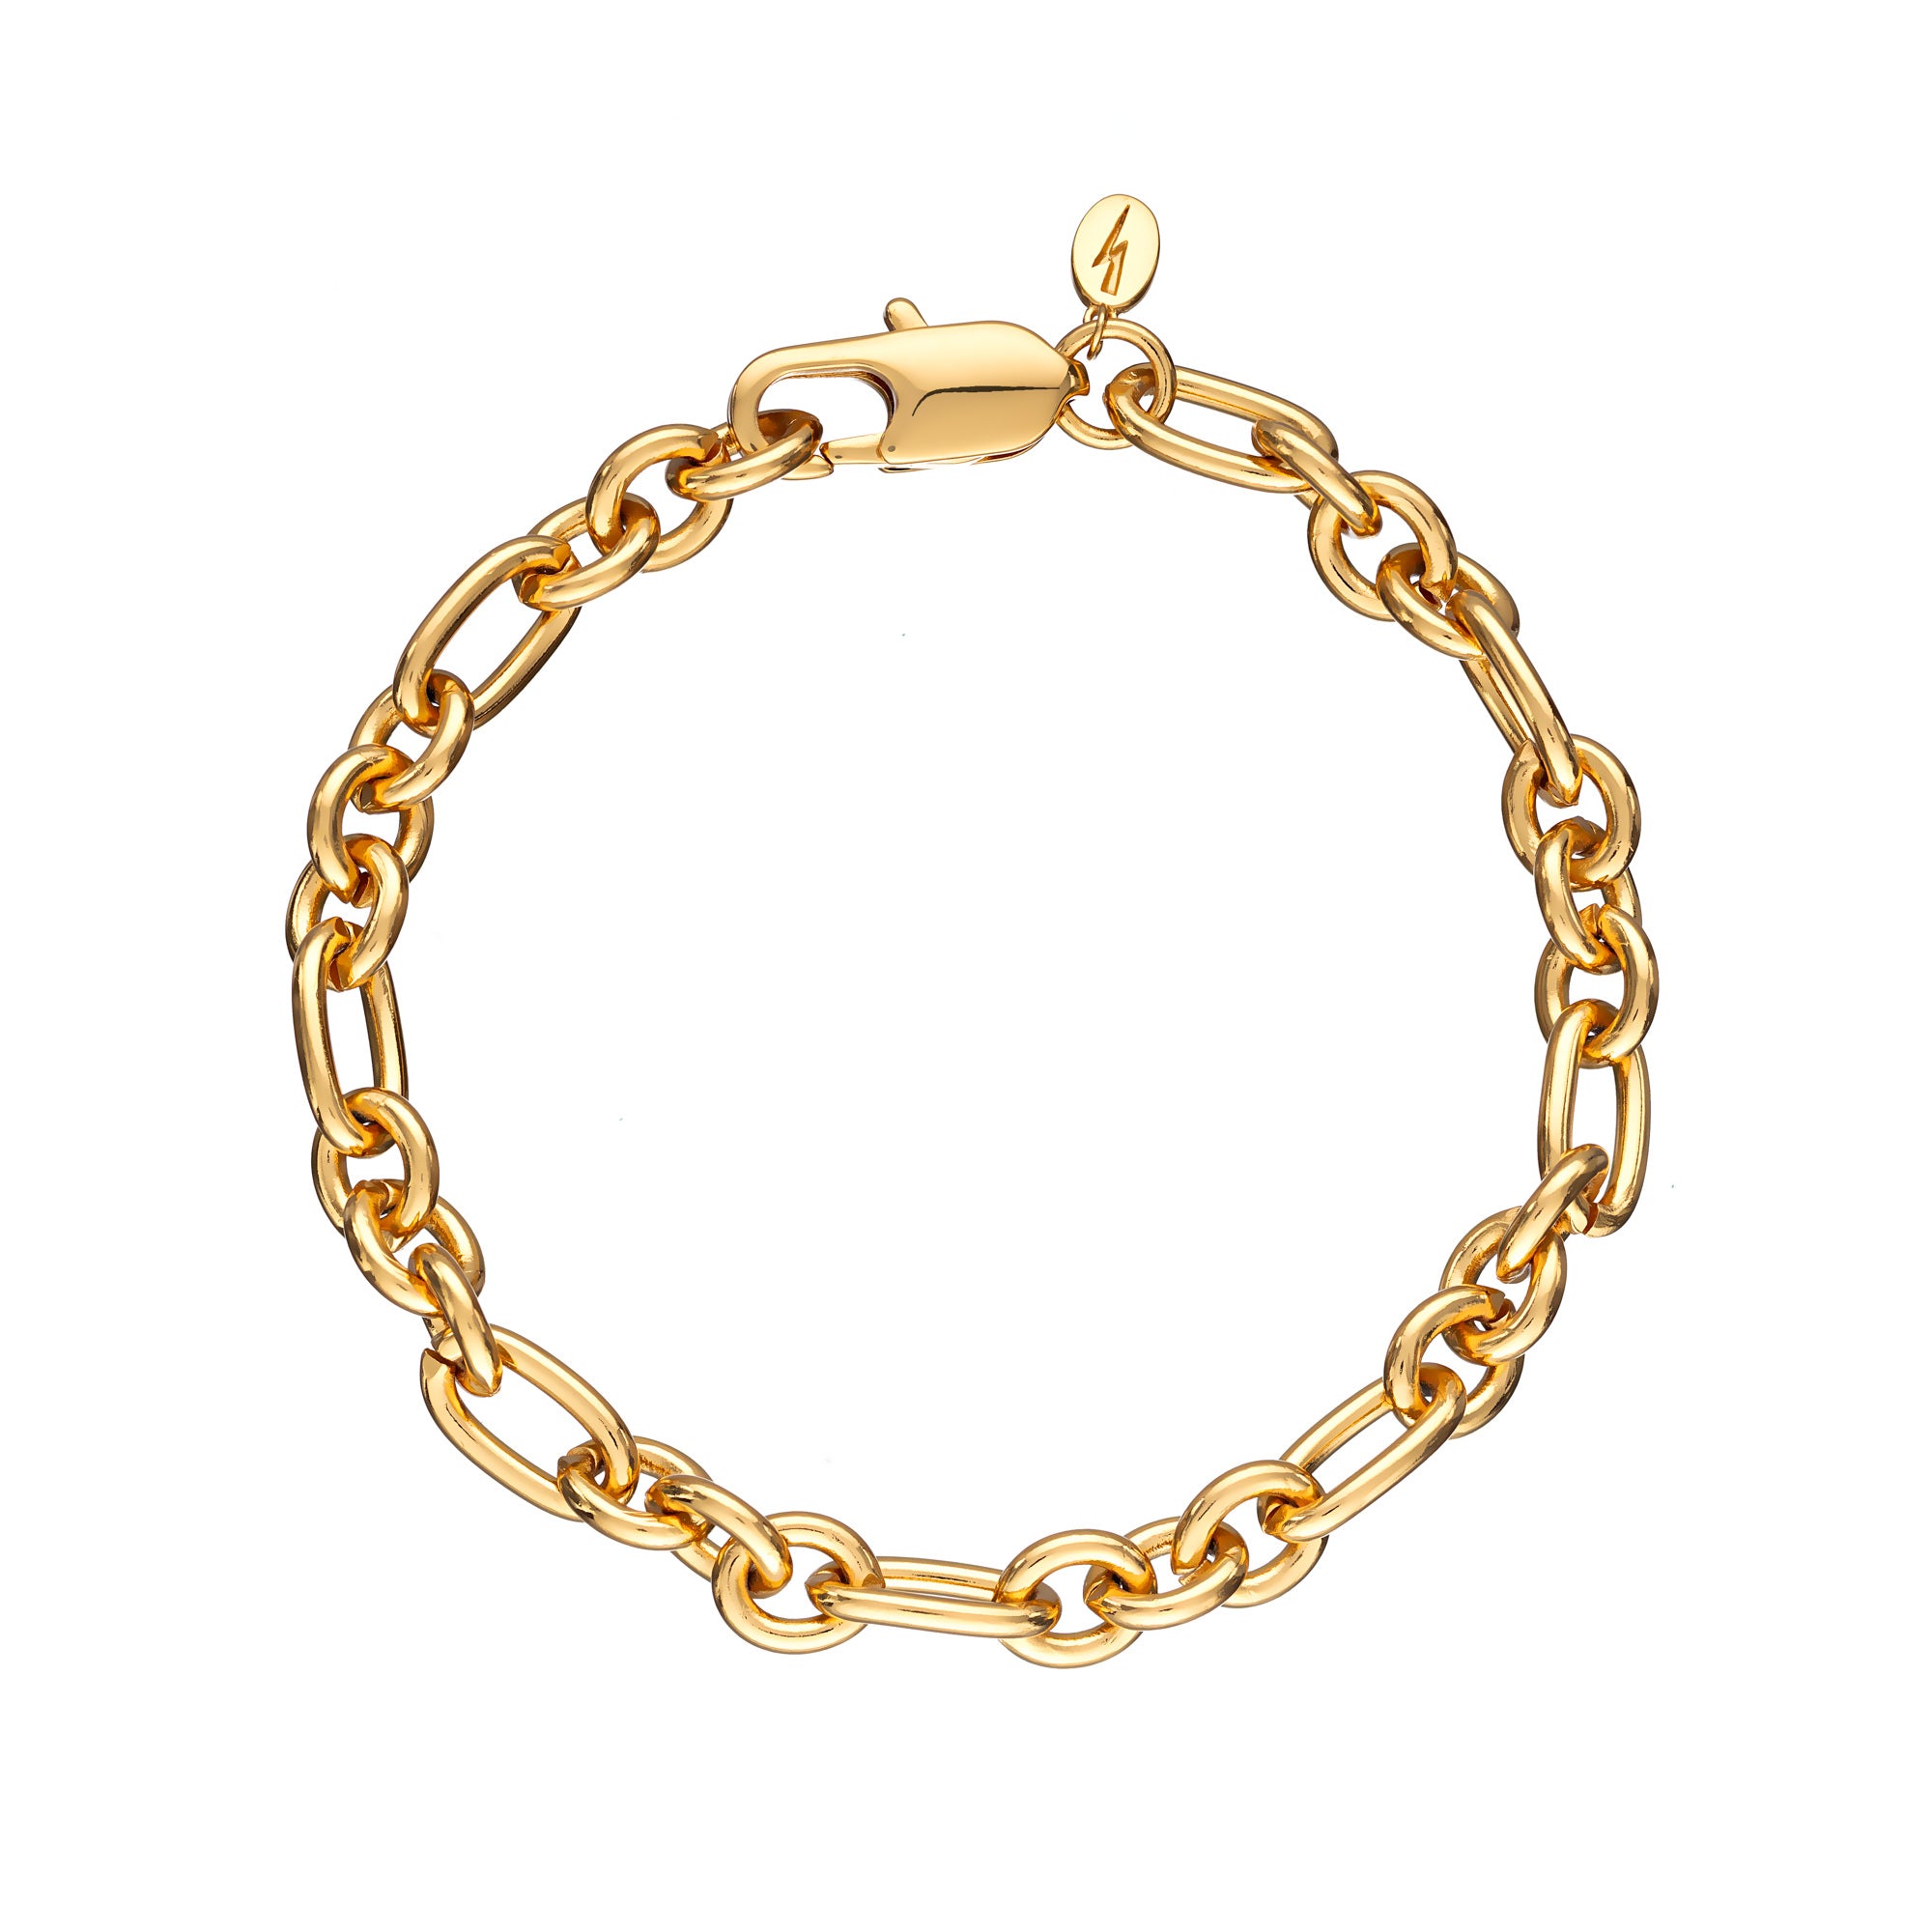 Chunky Chain Bracelet with Parrot Clasp